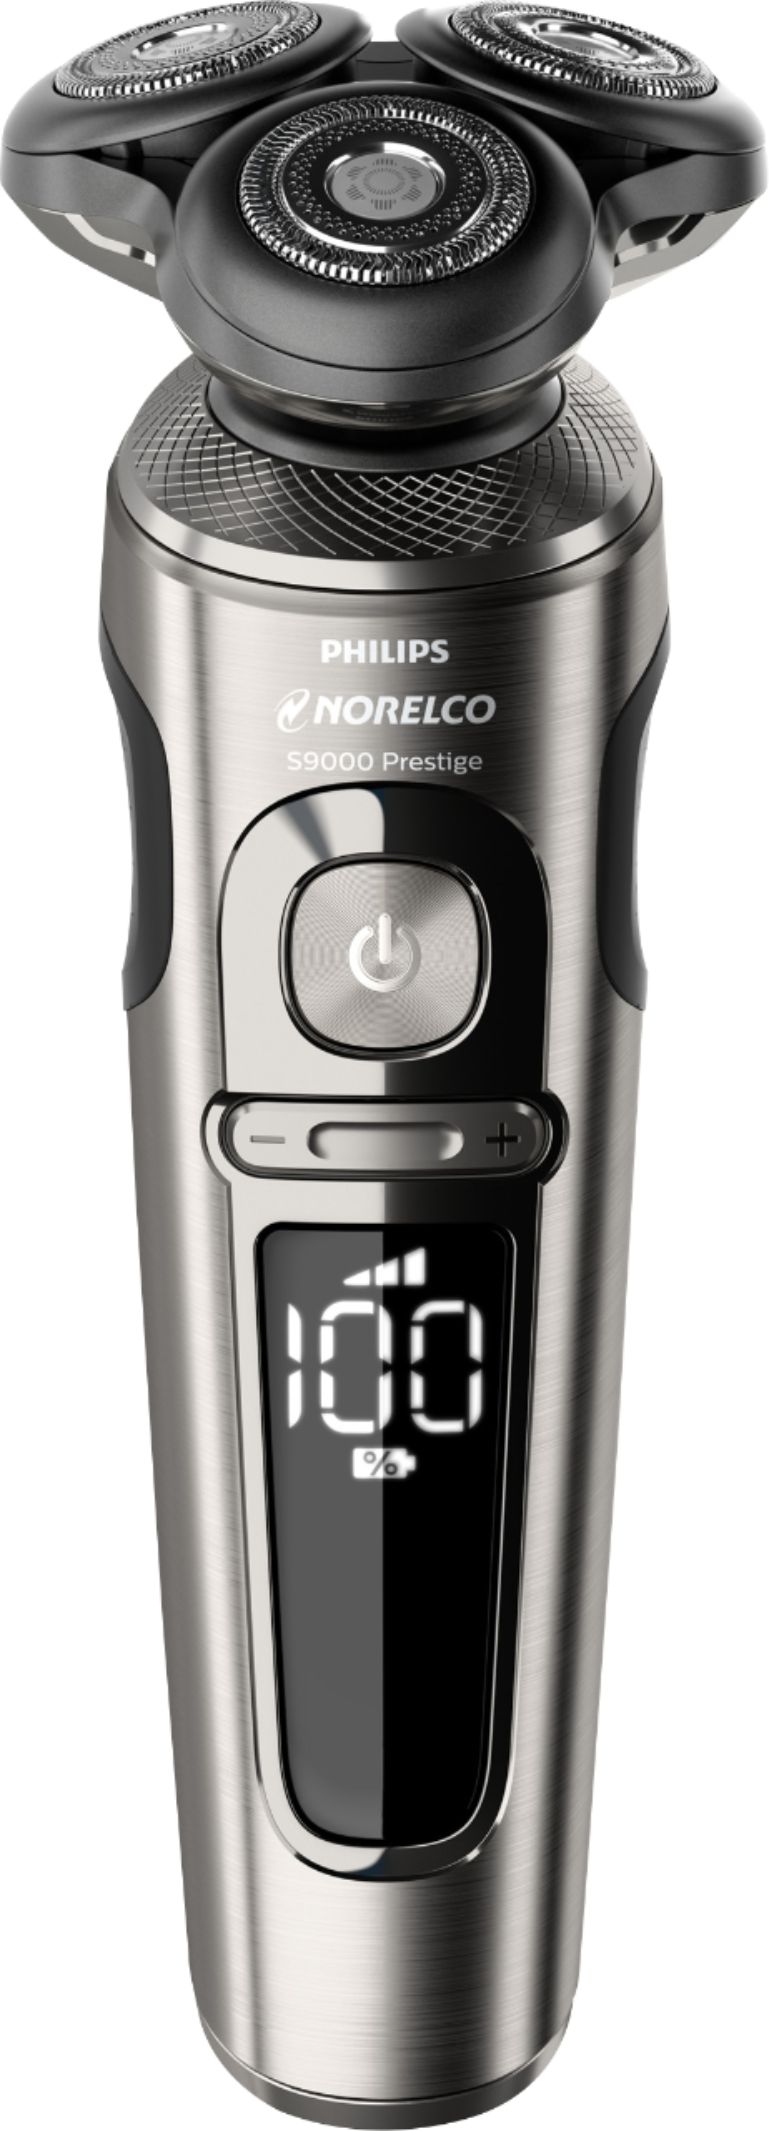 Philips Norelco S9000 Prestige Qi-Charge Electric Shaver Dark 